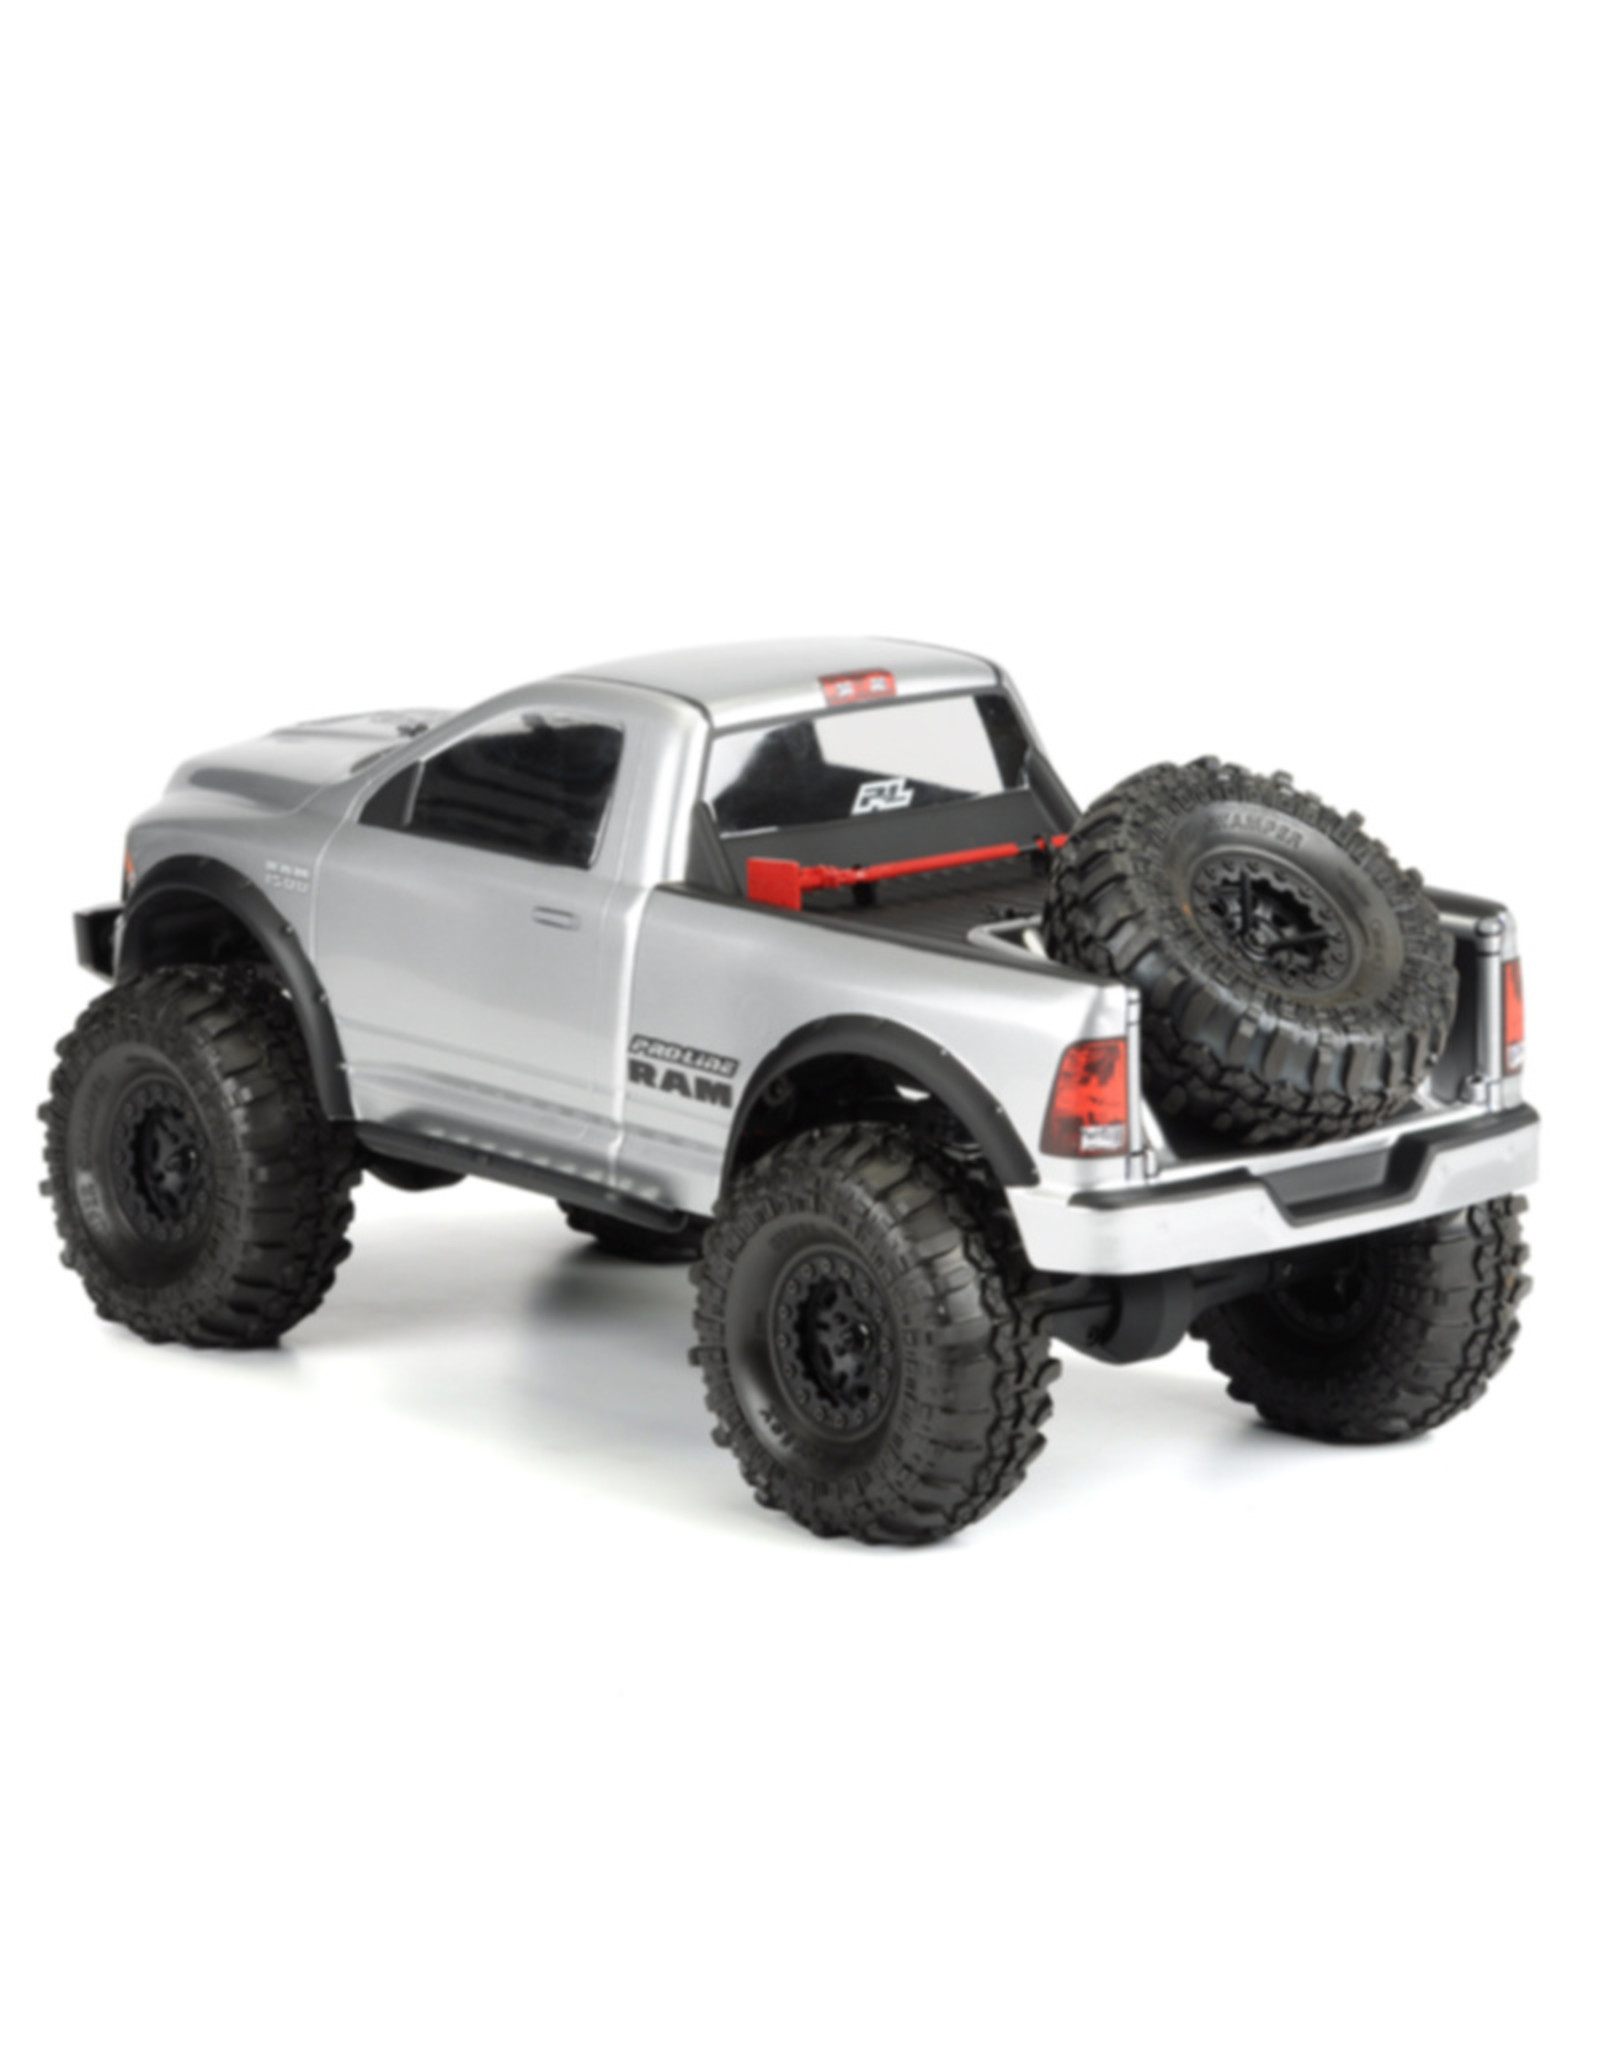 Pro-Line Racing PRO343400 RAM 1500 Clear Body : Scale Crawlers